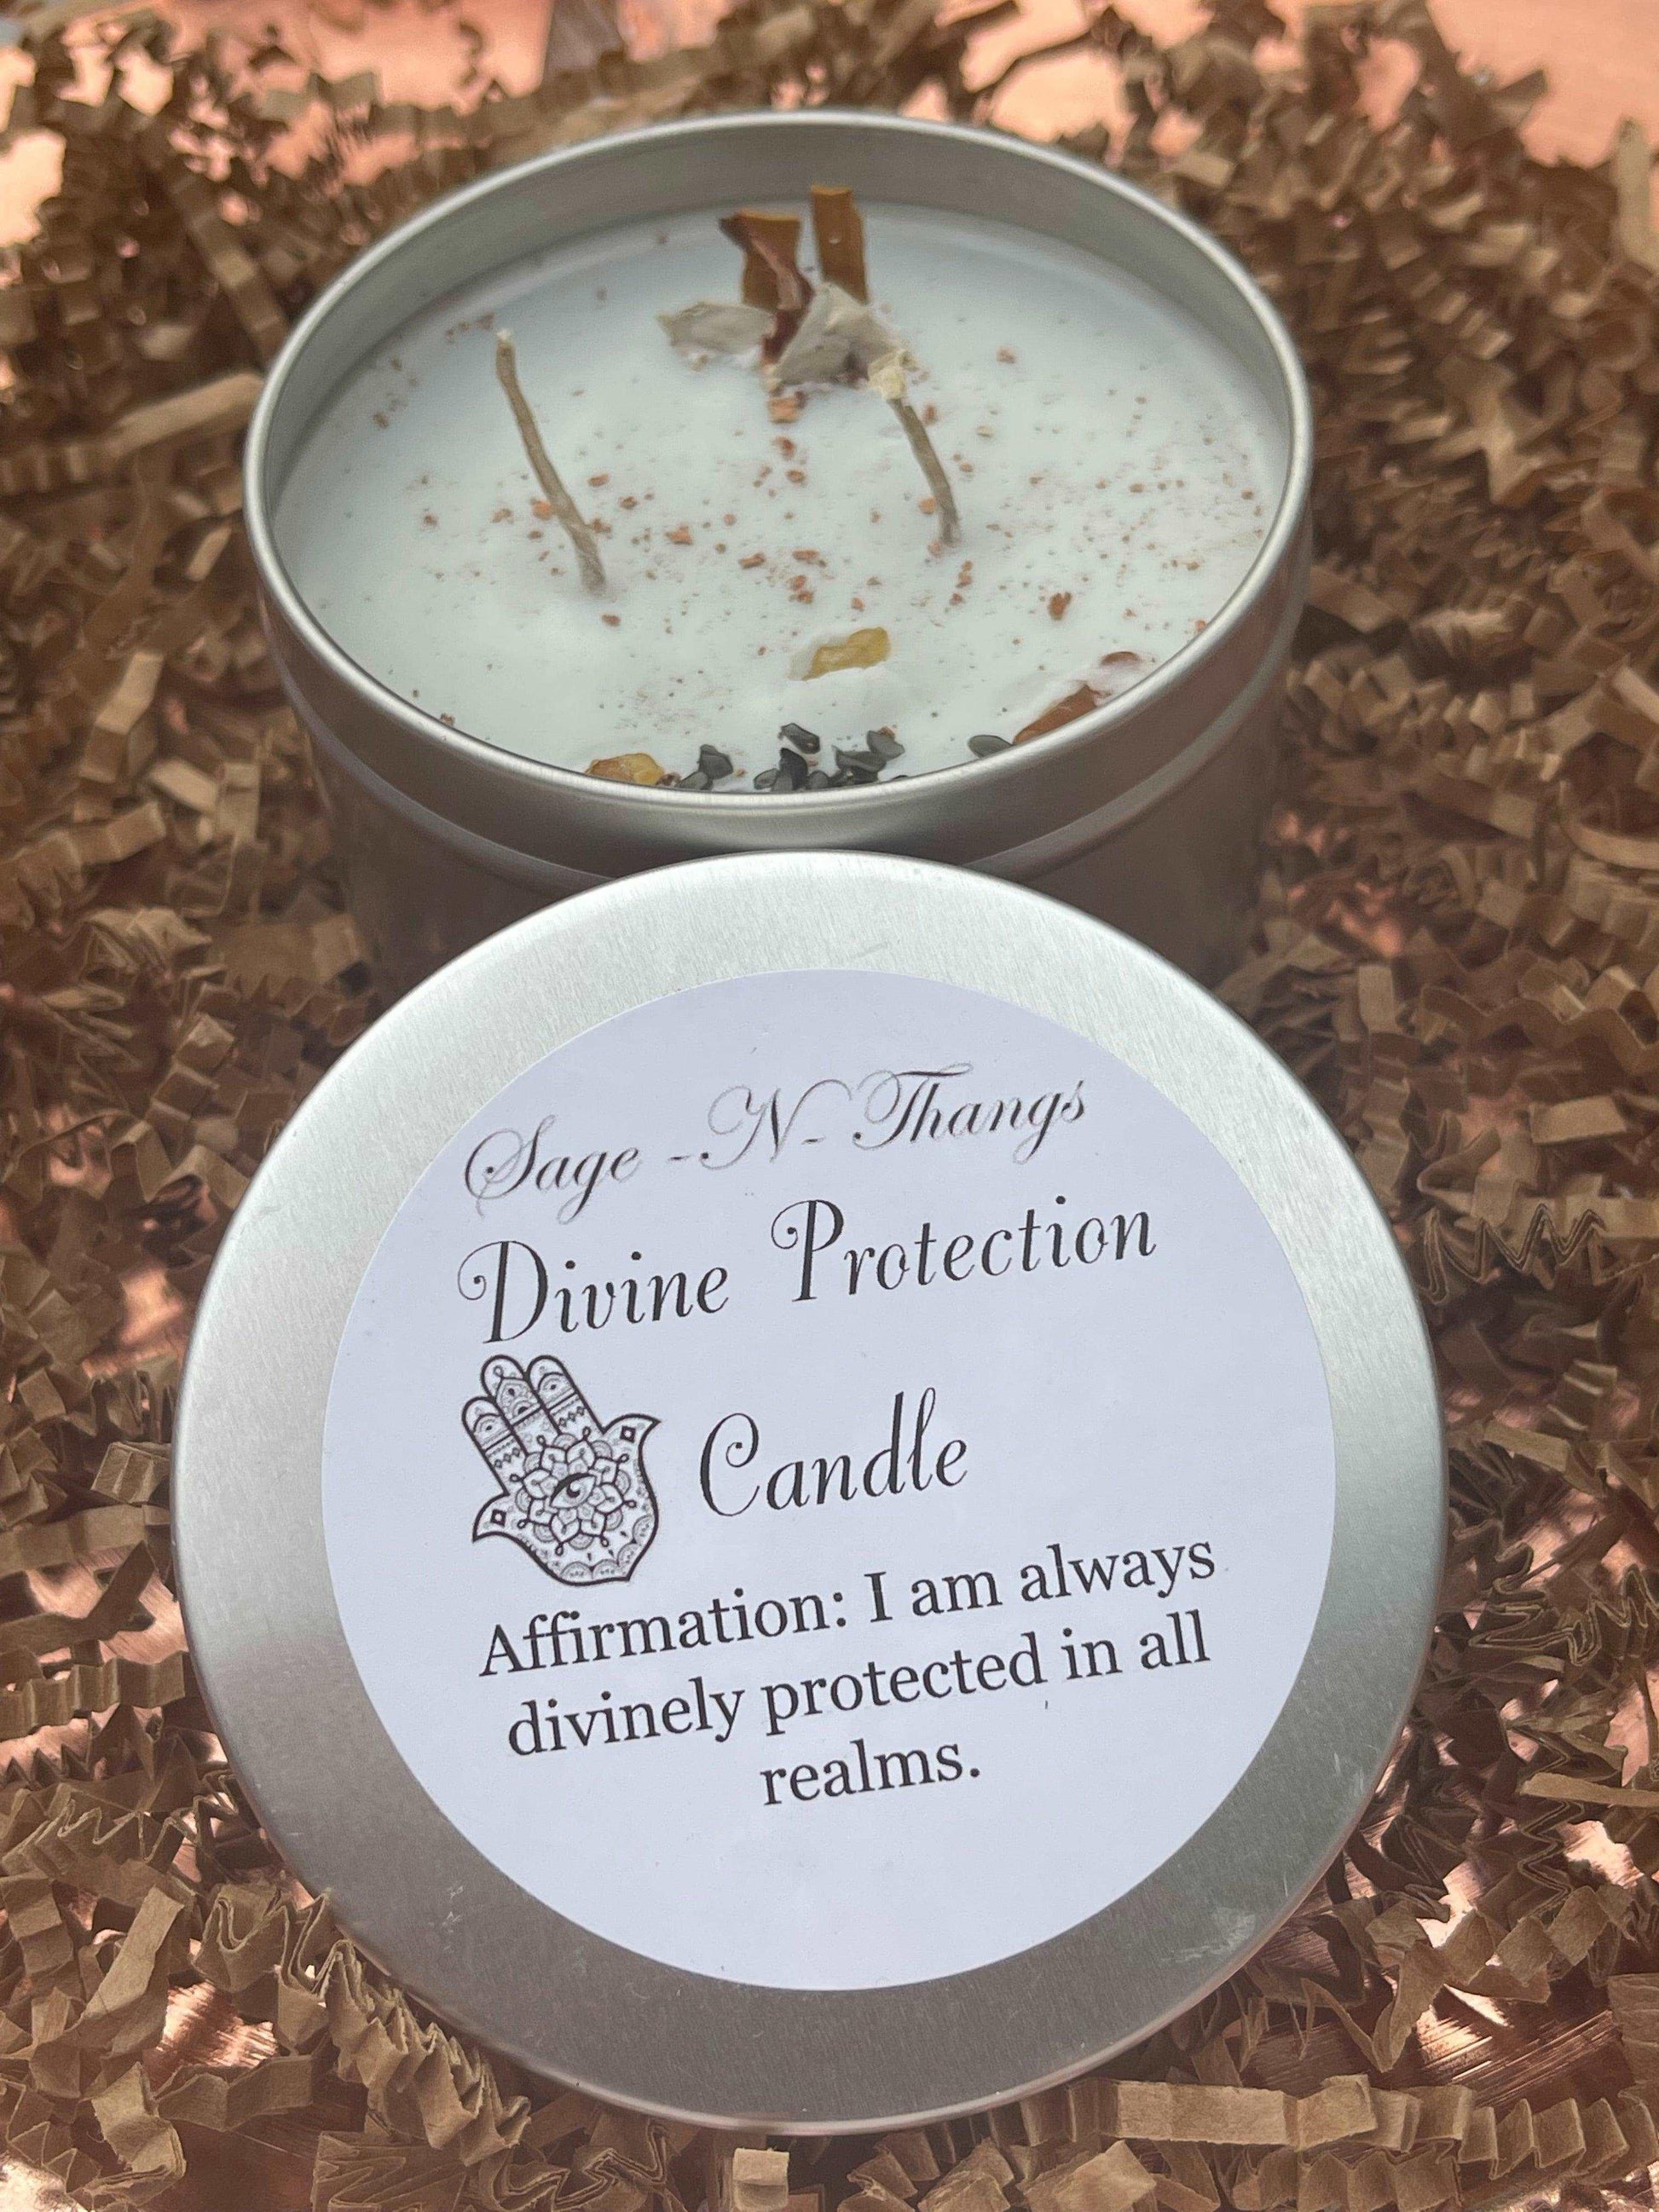 Divine Protection Candles by Sage N Thangs